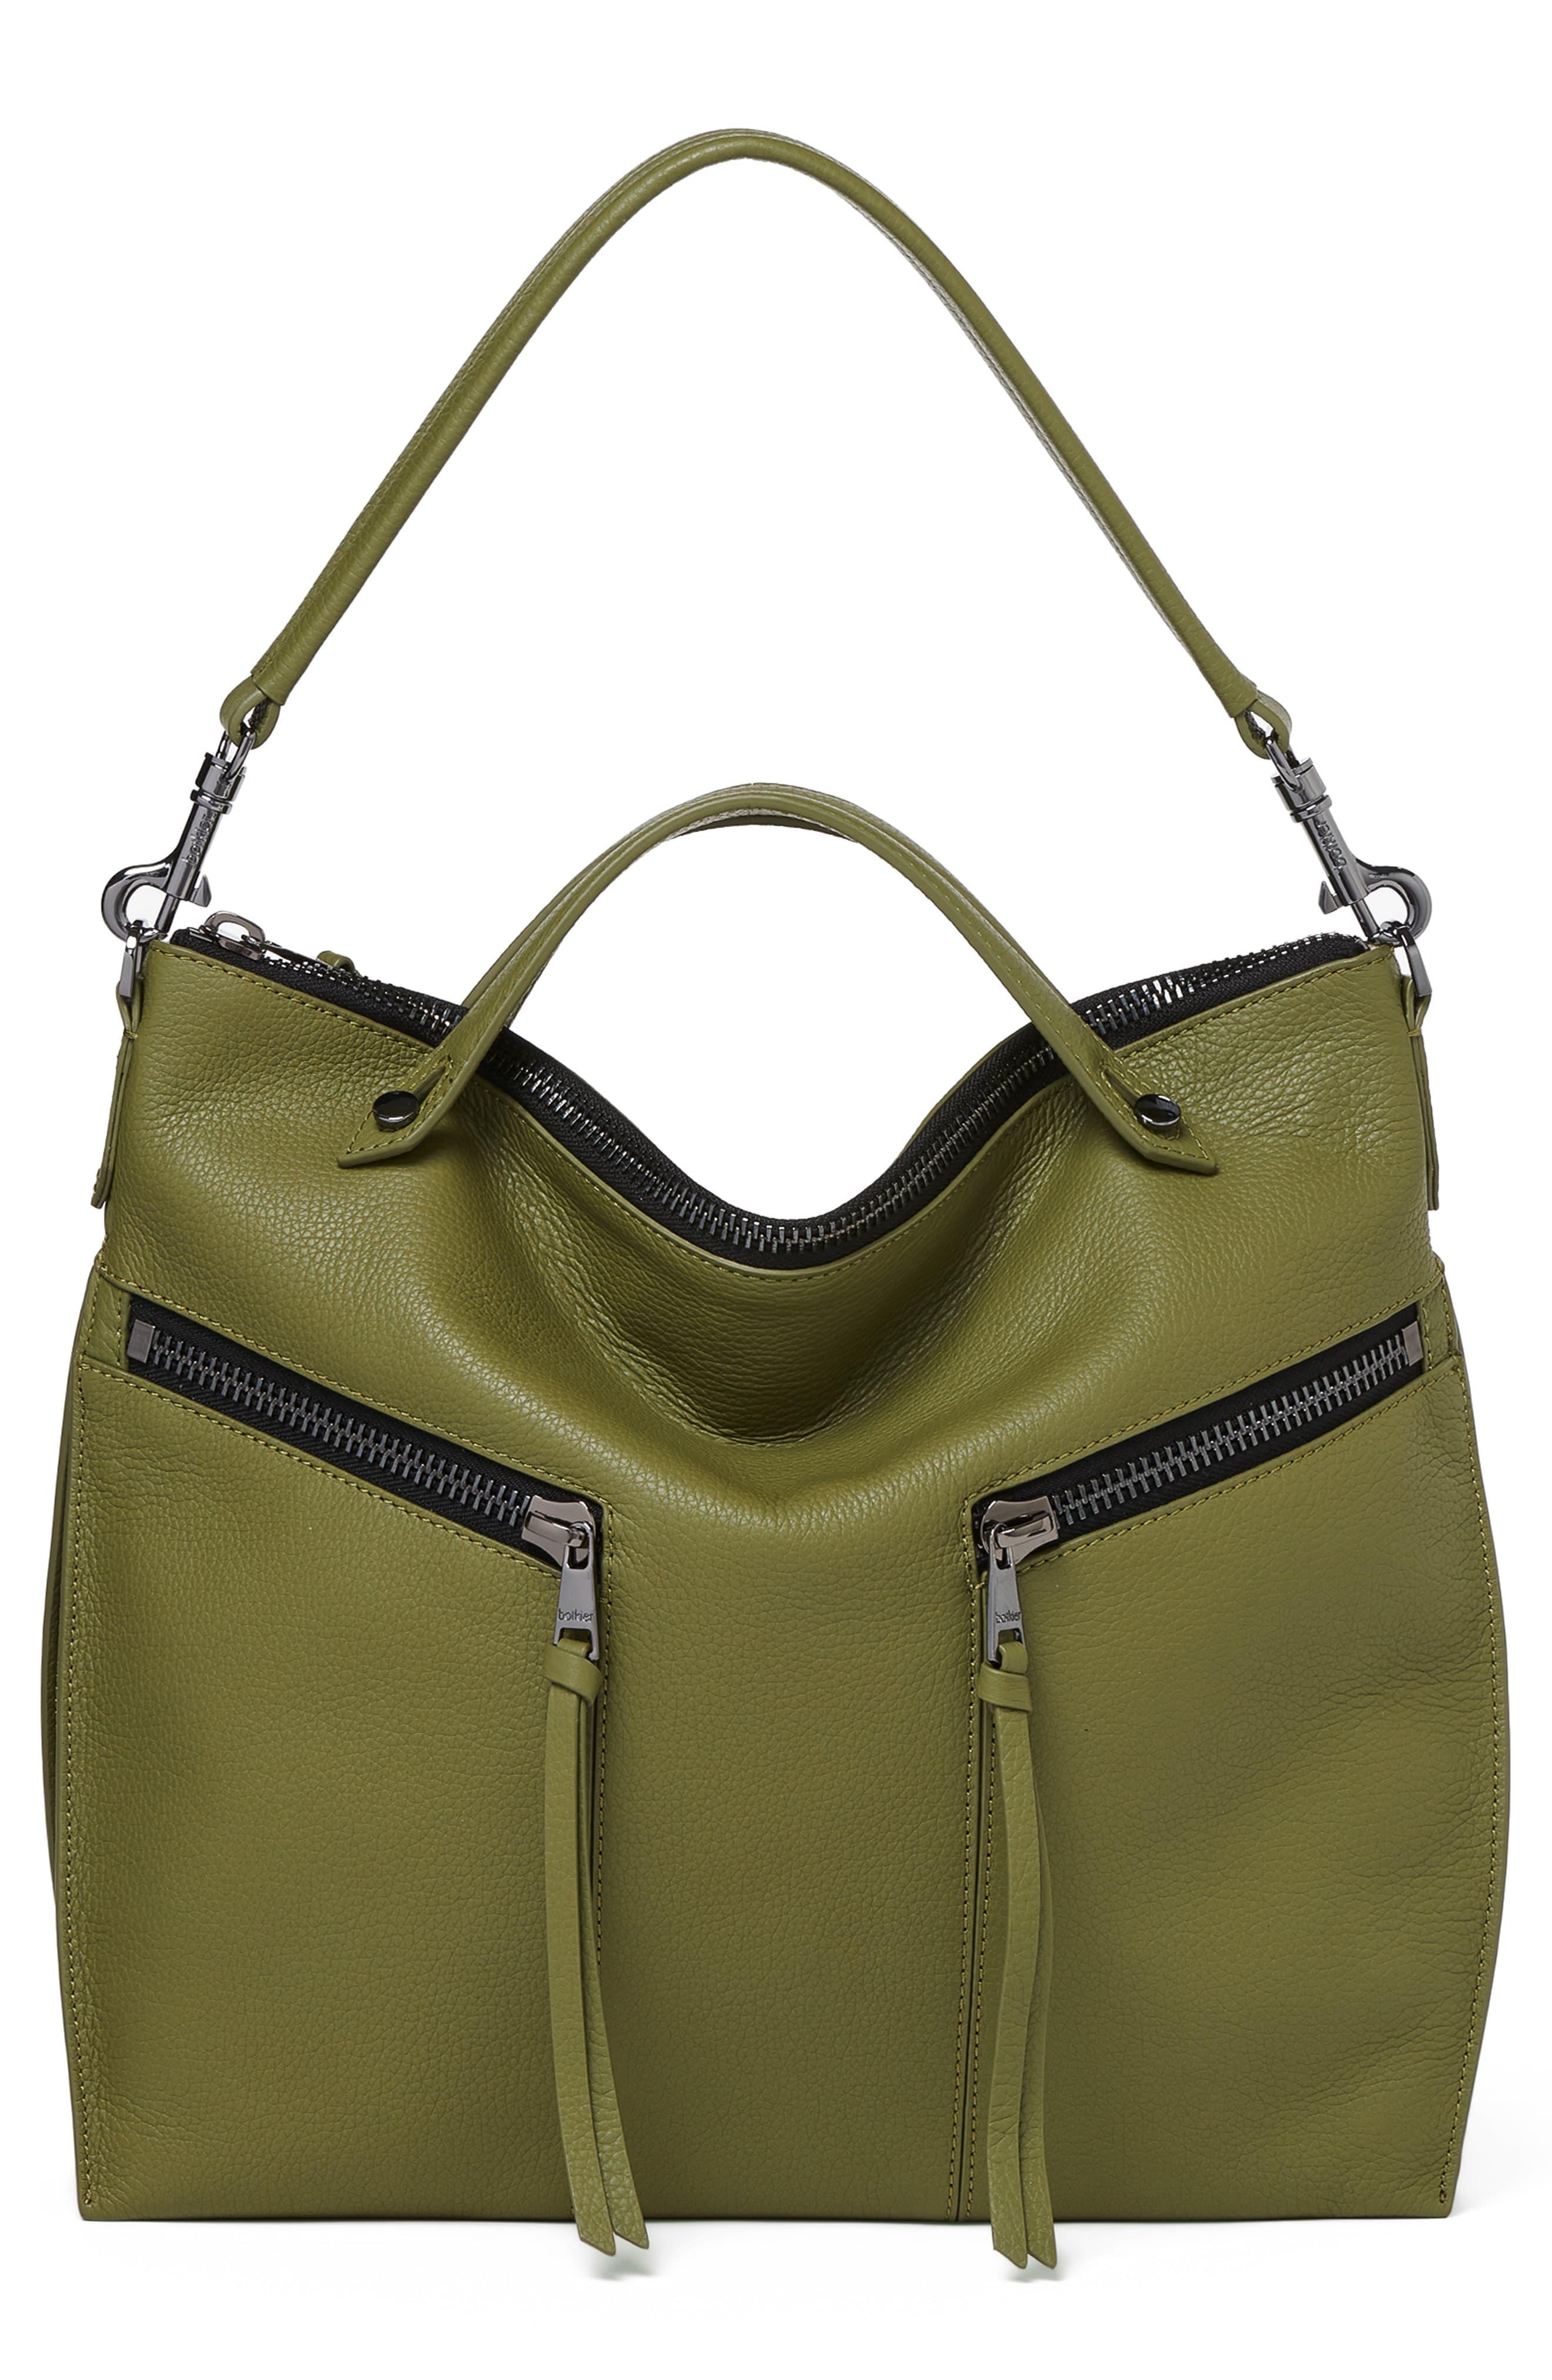 Botkier Leather Trigger Convertible Hobo Bag in Moss (Green) - Lyst